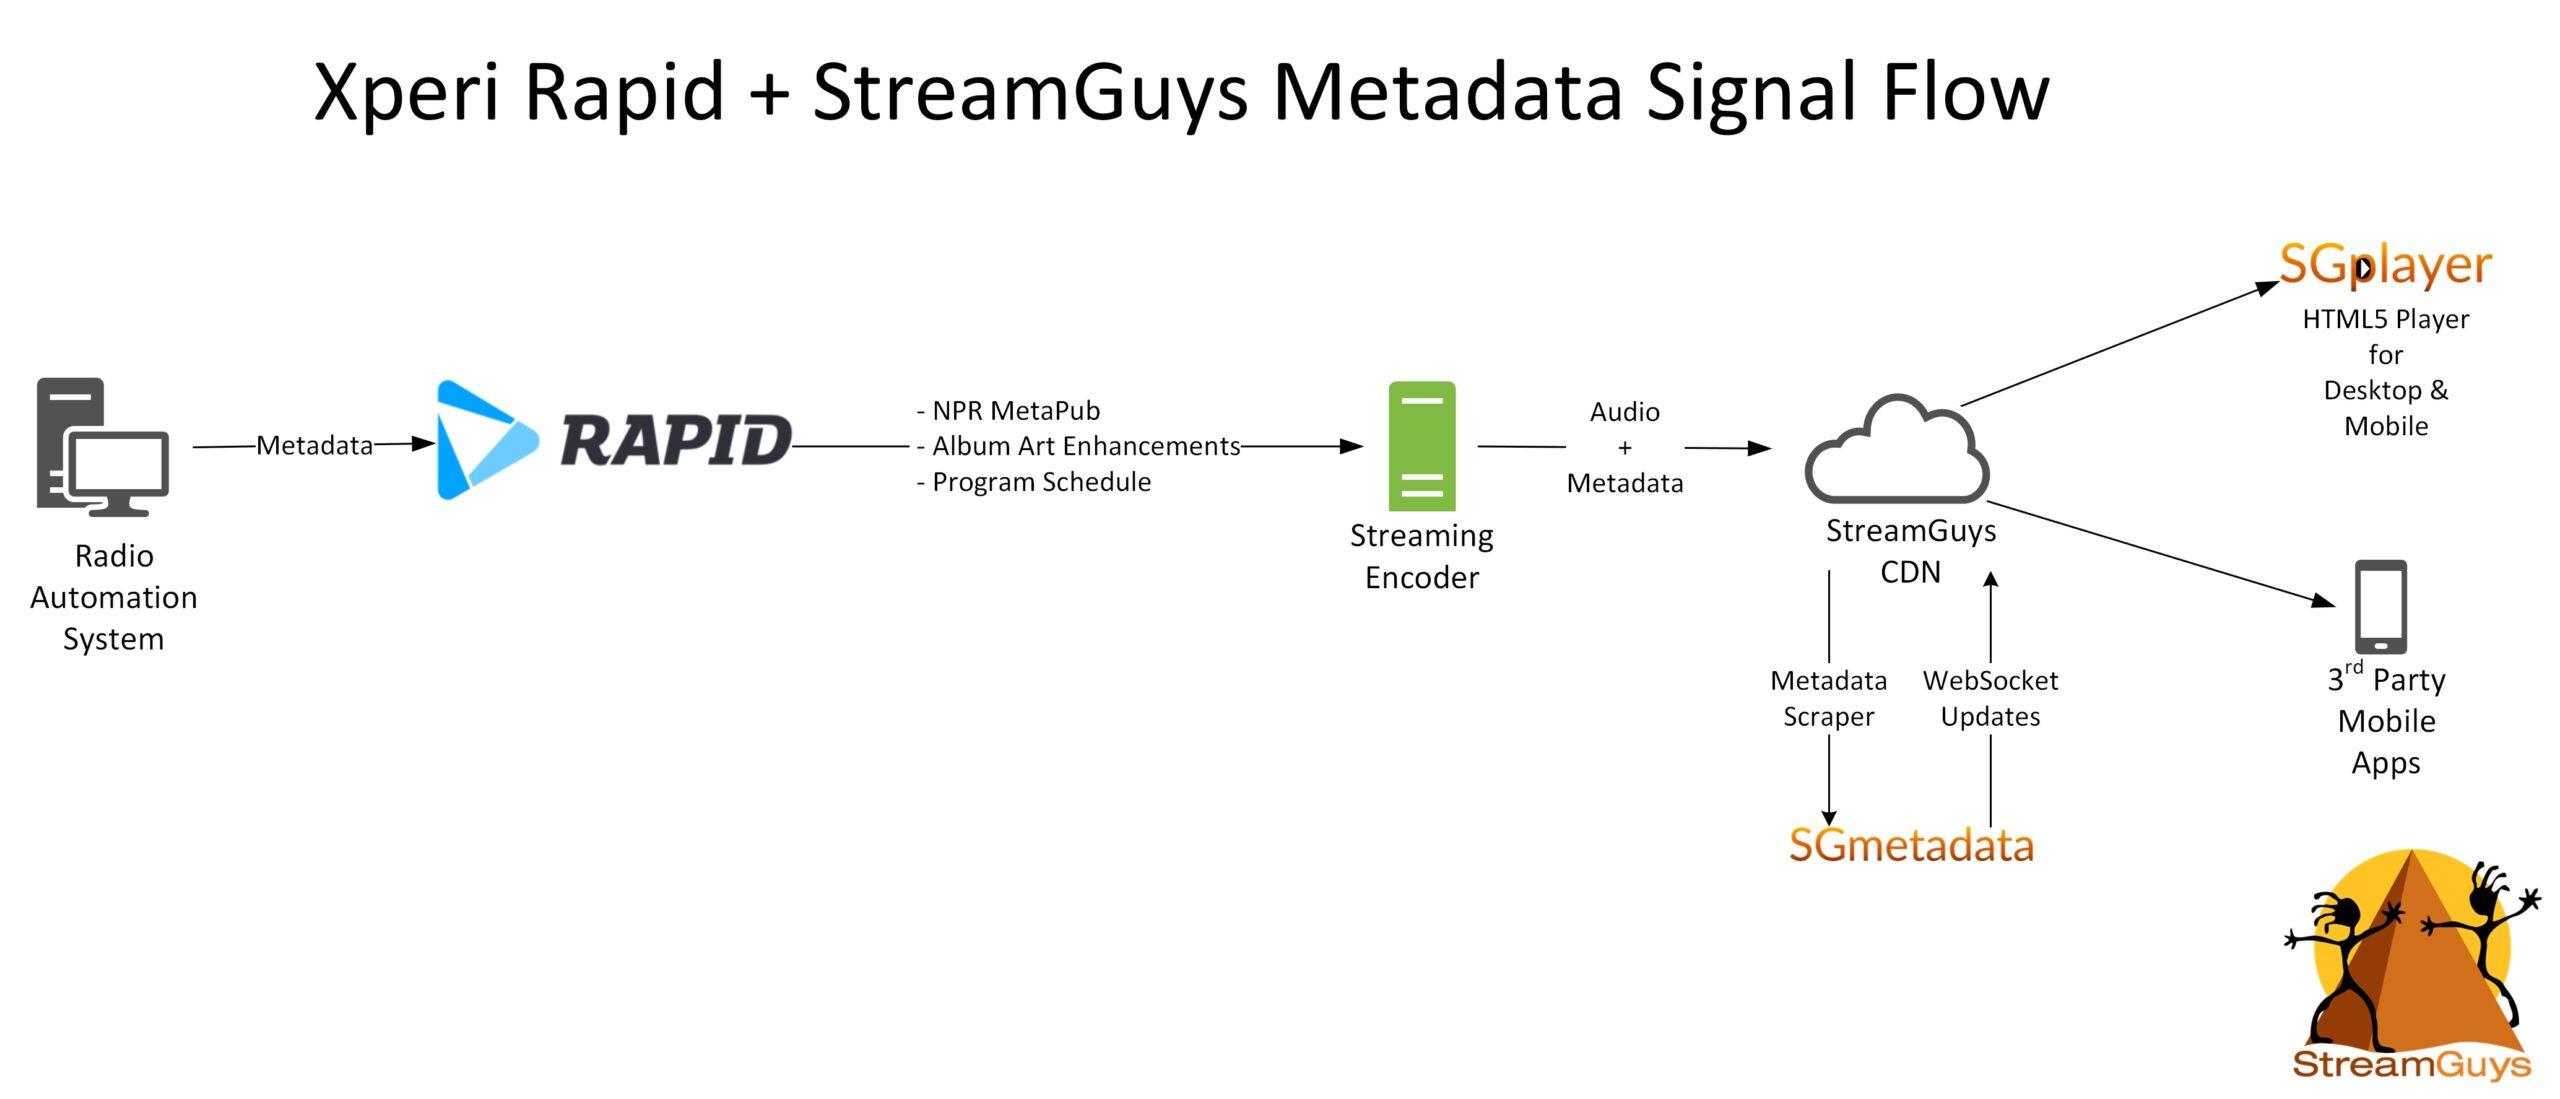 Graphic showing the metadata workflow described in the article